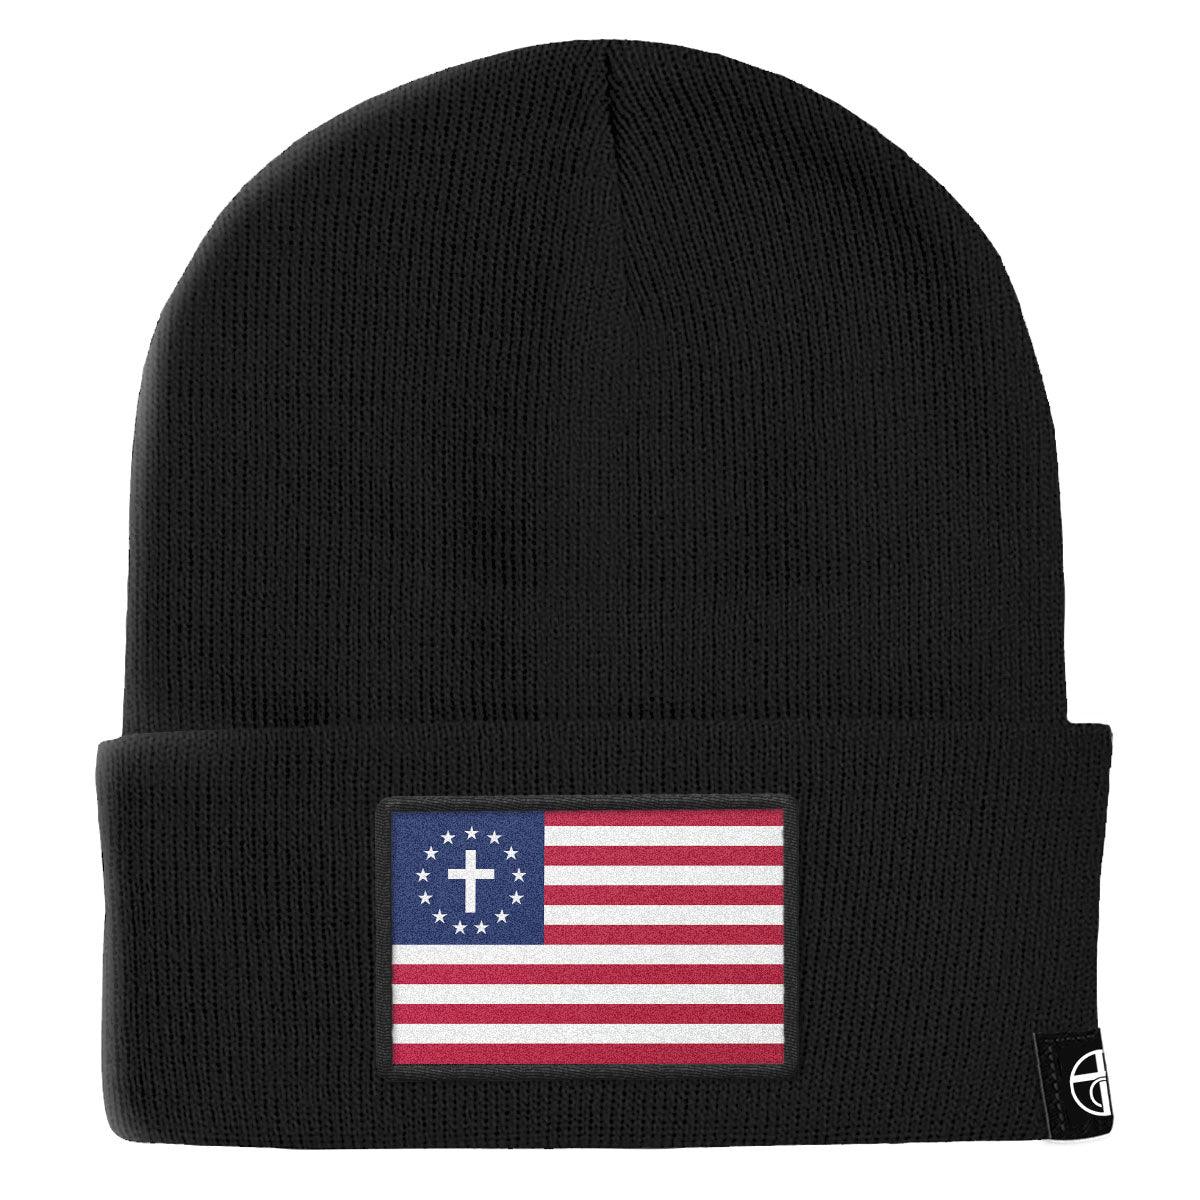 One Nation Under God Patch Beanies